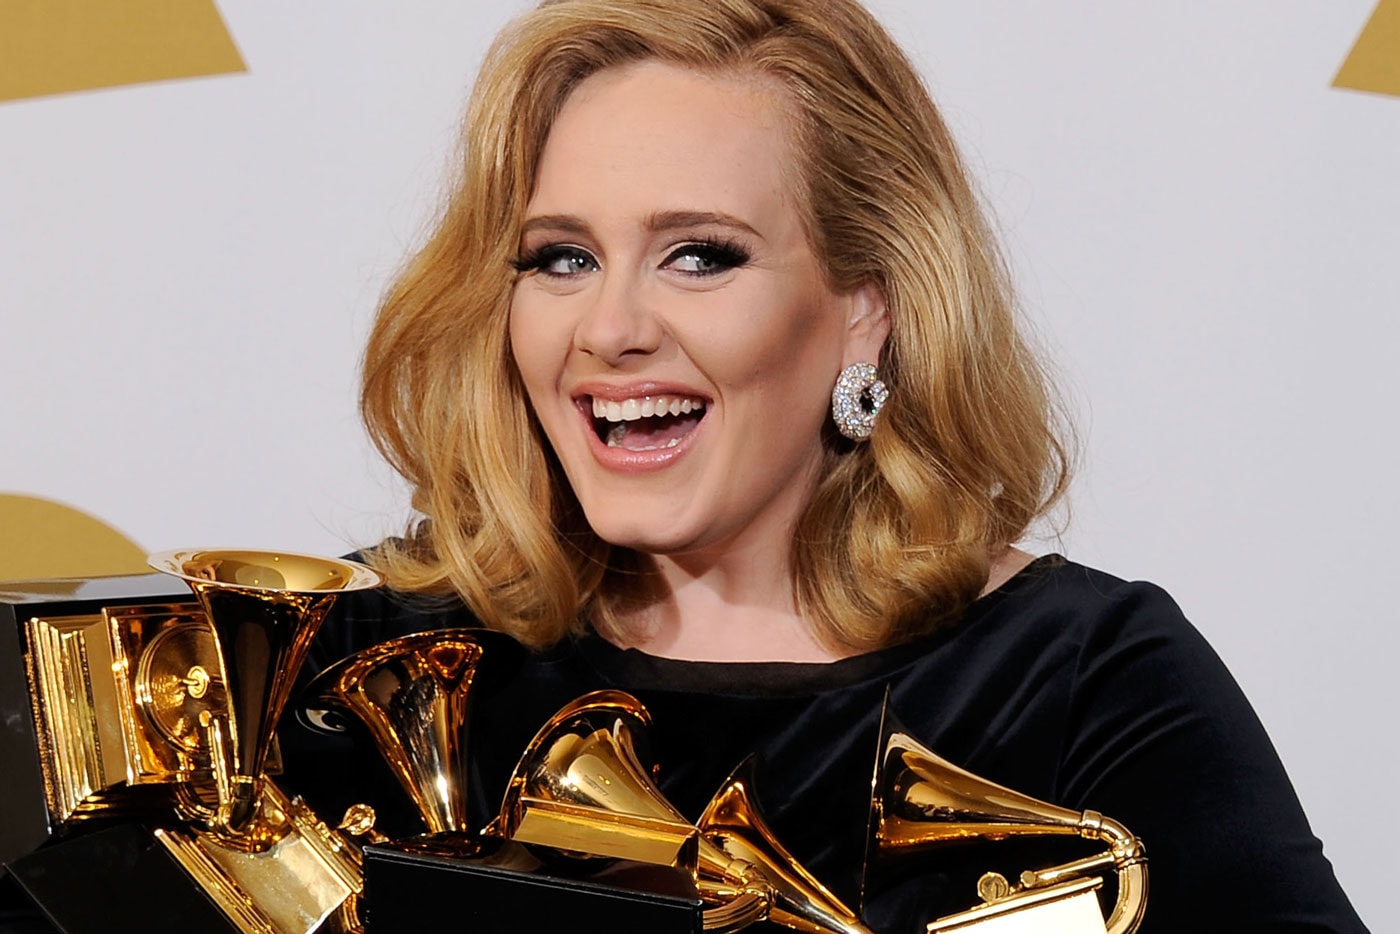 Listen to Adele's First Song in Three Years, "Hello"